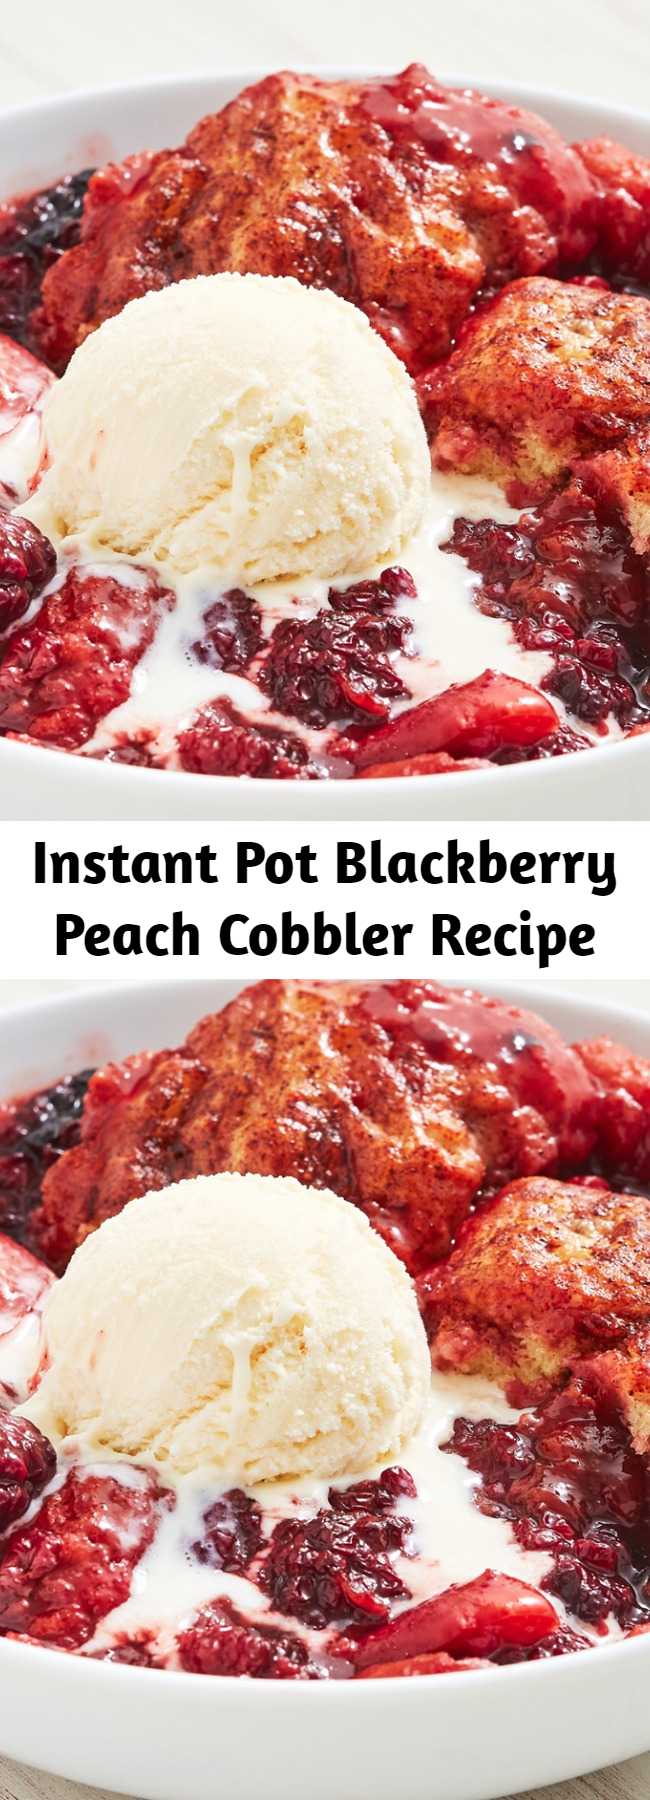 Instant Pot Blackberry Peach Cobbler Recipe - Summer calls for as many fruit cobblers as possible. There's just one thing: We HATE turning on the oven in the summer. Enter, the Instant Pot. No need for extra heat, and the cobbler only needs 15 minutes to cook. Now, that's dessert in an instant. 